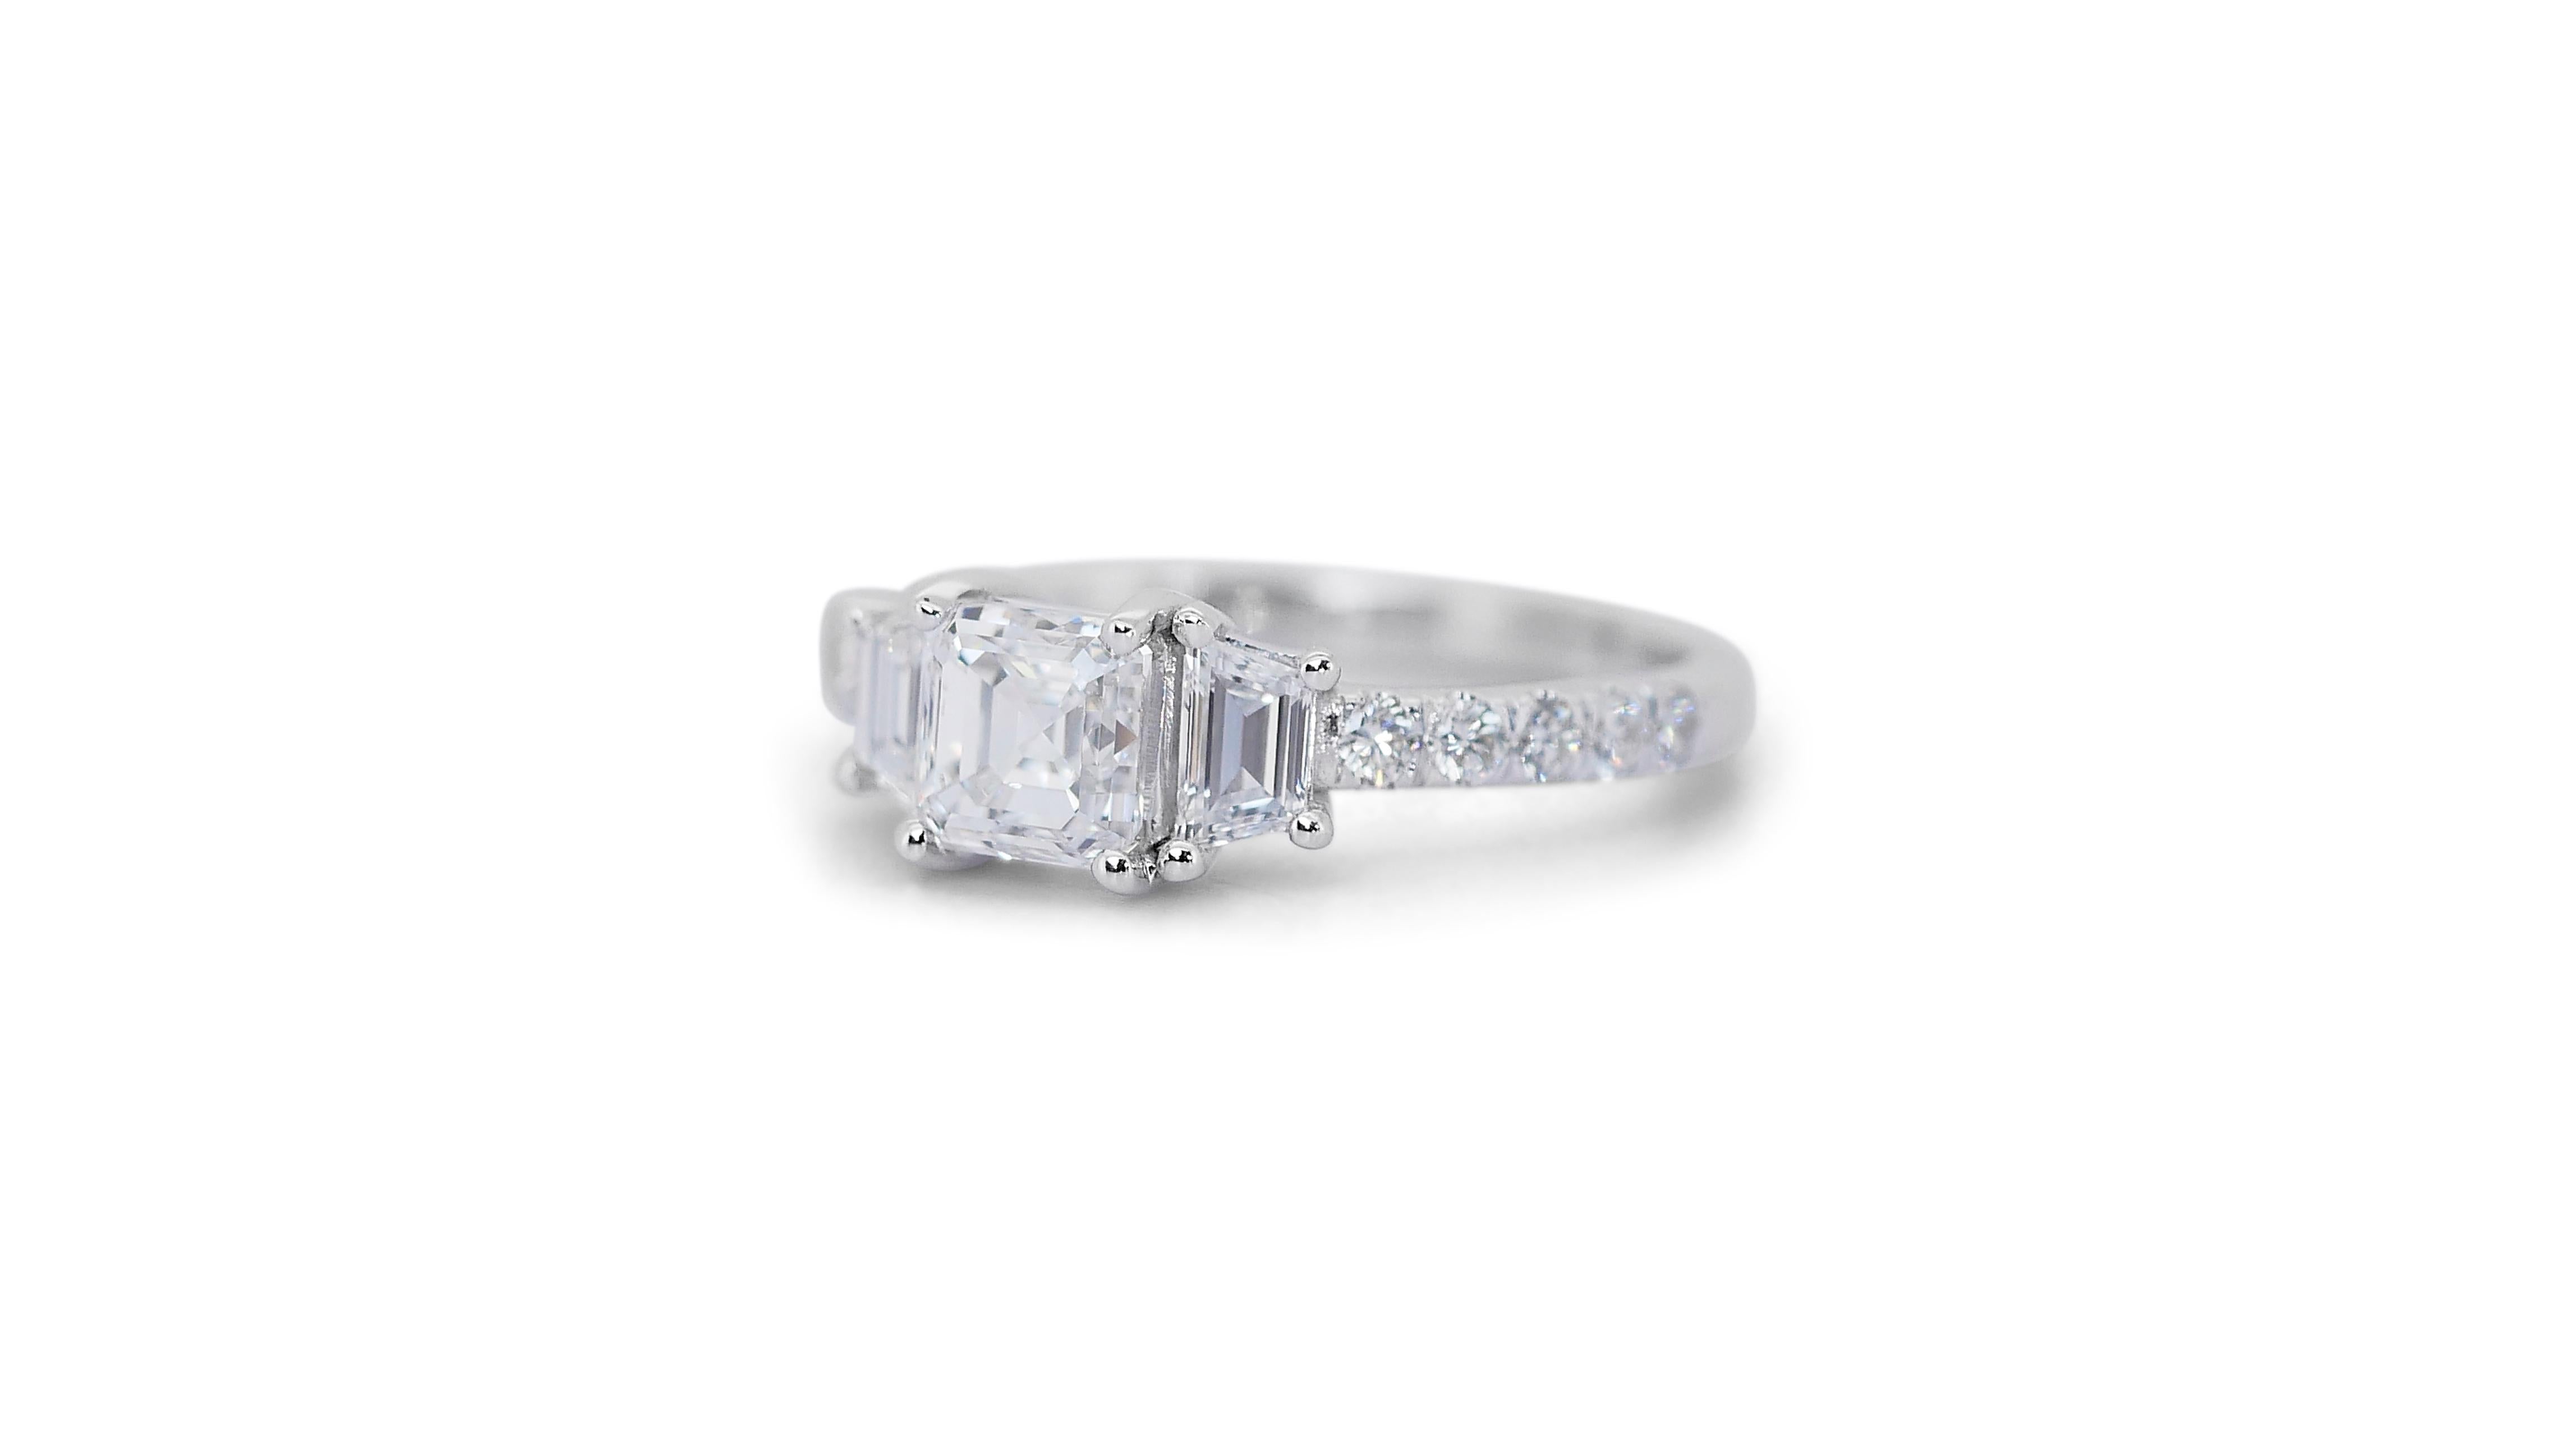  Stunning 18 kt. White Gold Ring with 1.71 ct Total Natural Diamonds - GIA Cert For Sale 1